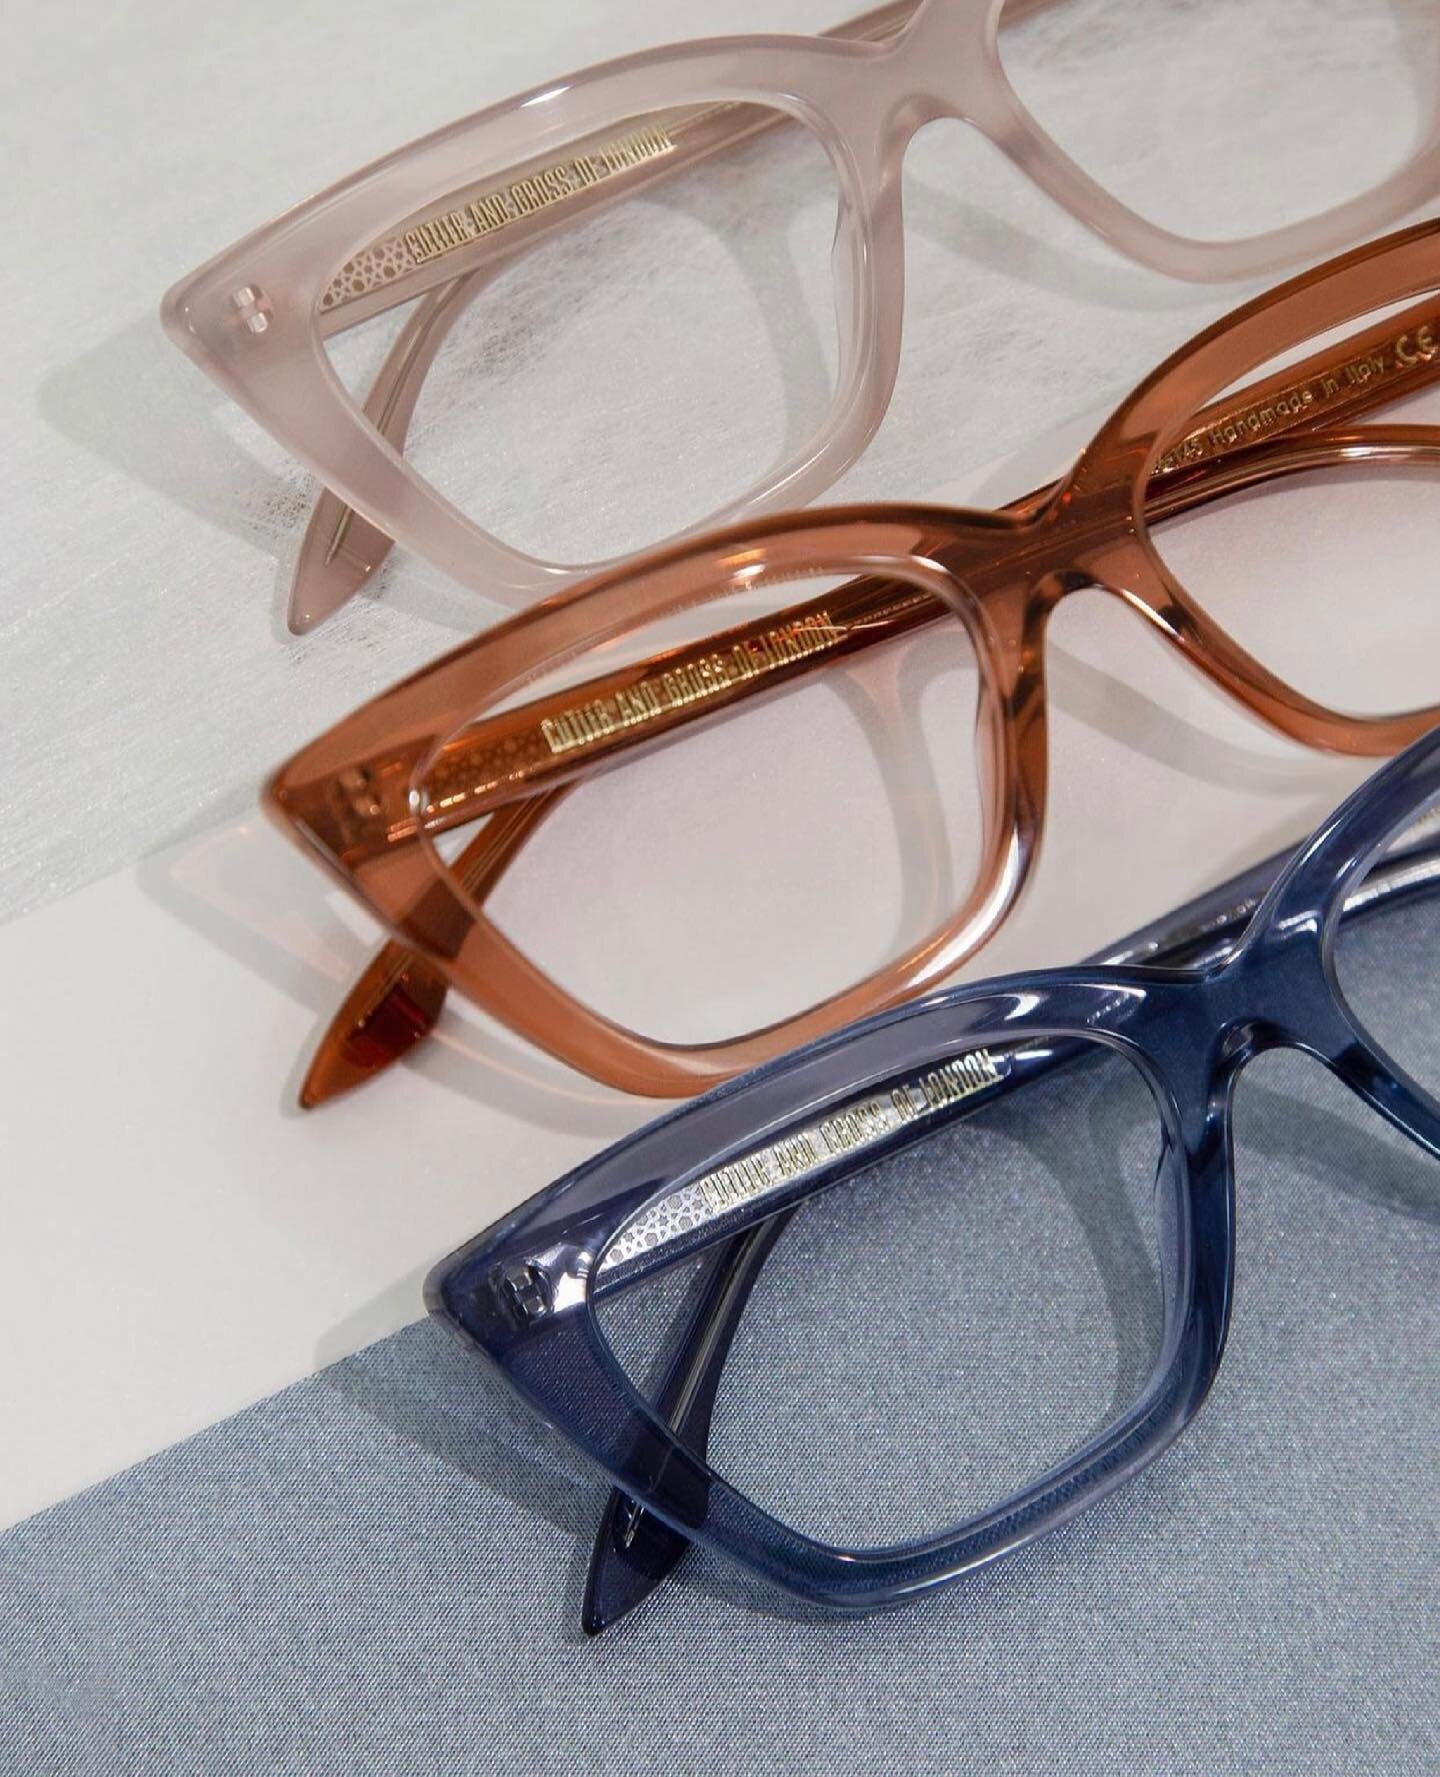 Soft new colours for Summer 2021

@cutlerandgross #cutlerandgross #summer #summerfashion #boutique #eyewear #sunglasses #summerstyle #onevisionopticians